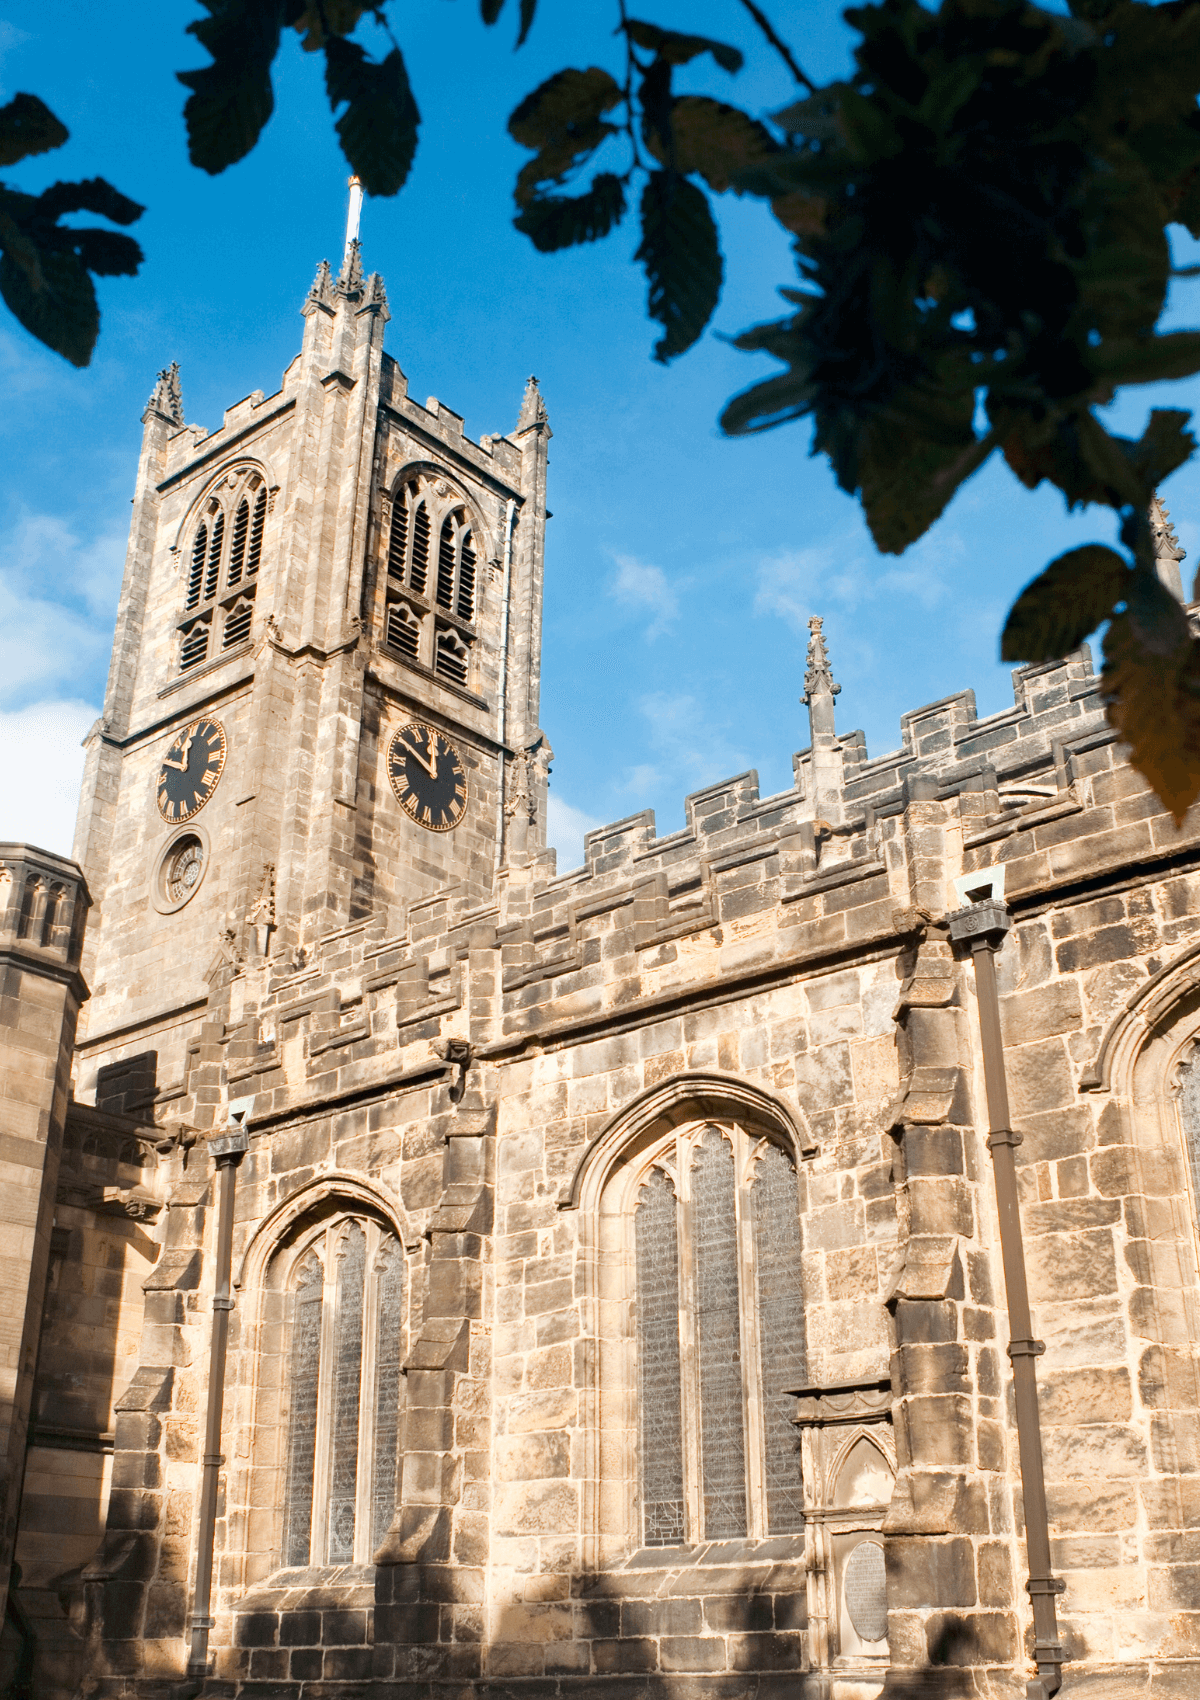 Lancaster Priory is one of the best things to do and see in a one-day itinerary in the city